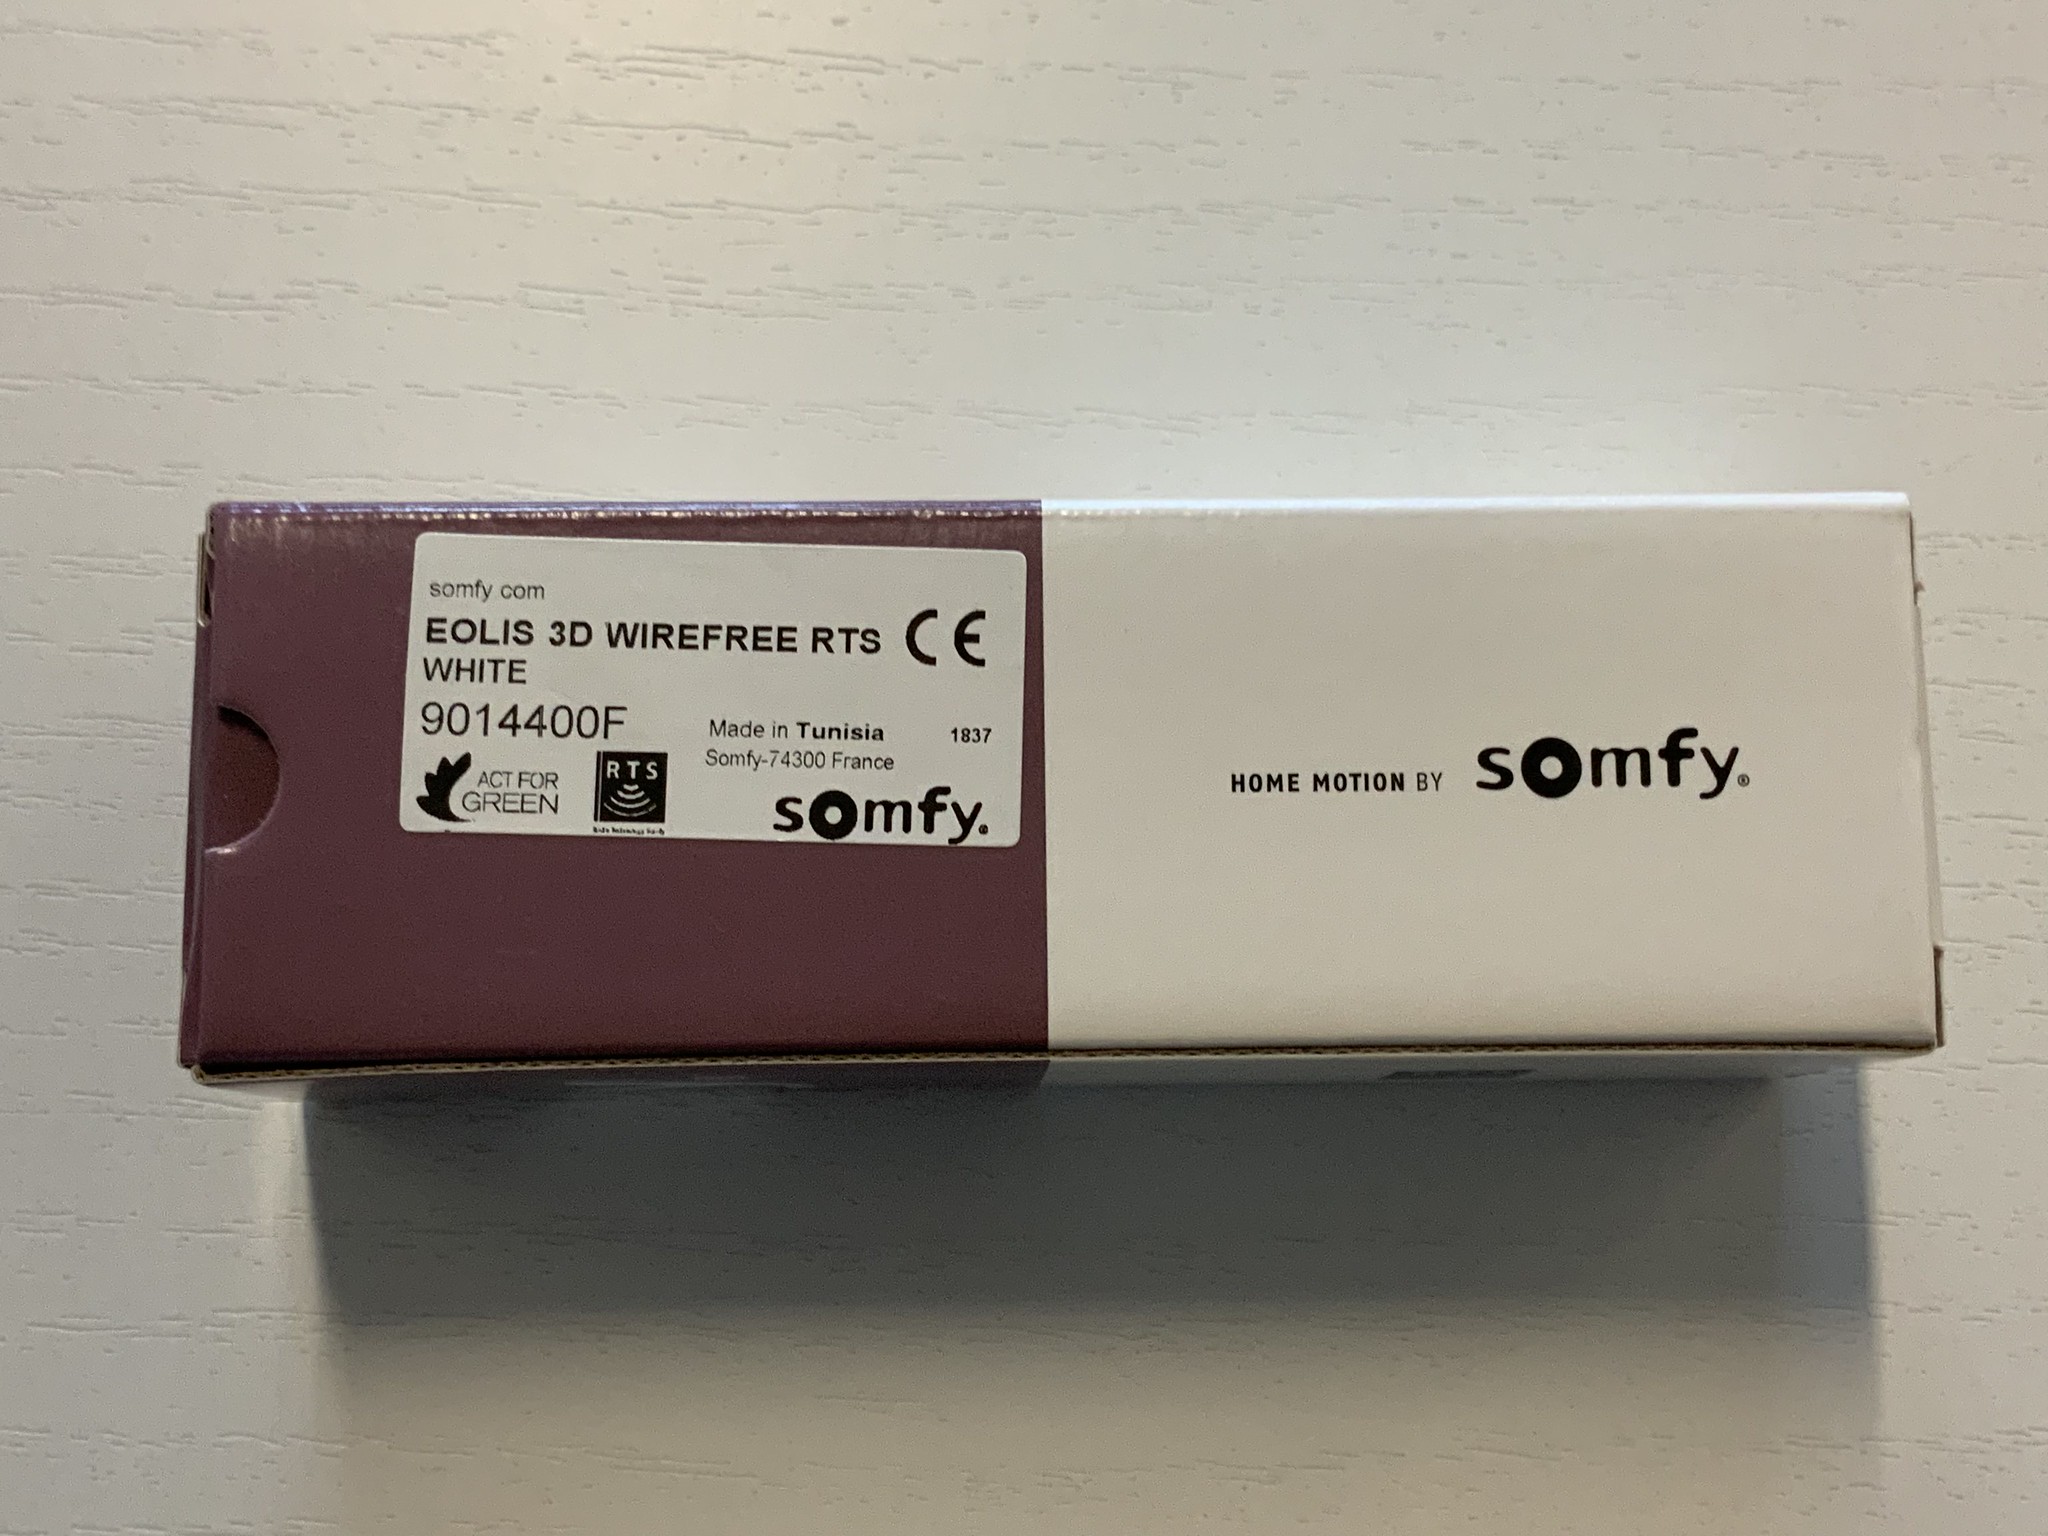 Somfy Eolis 3D Wirefree RTS 01